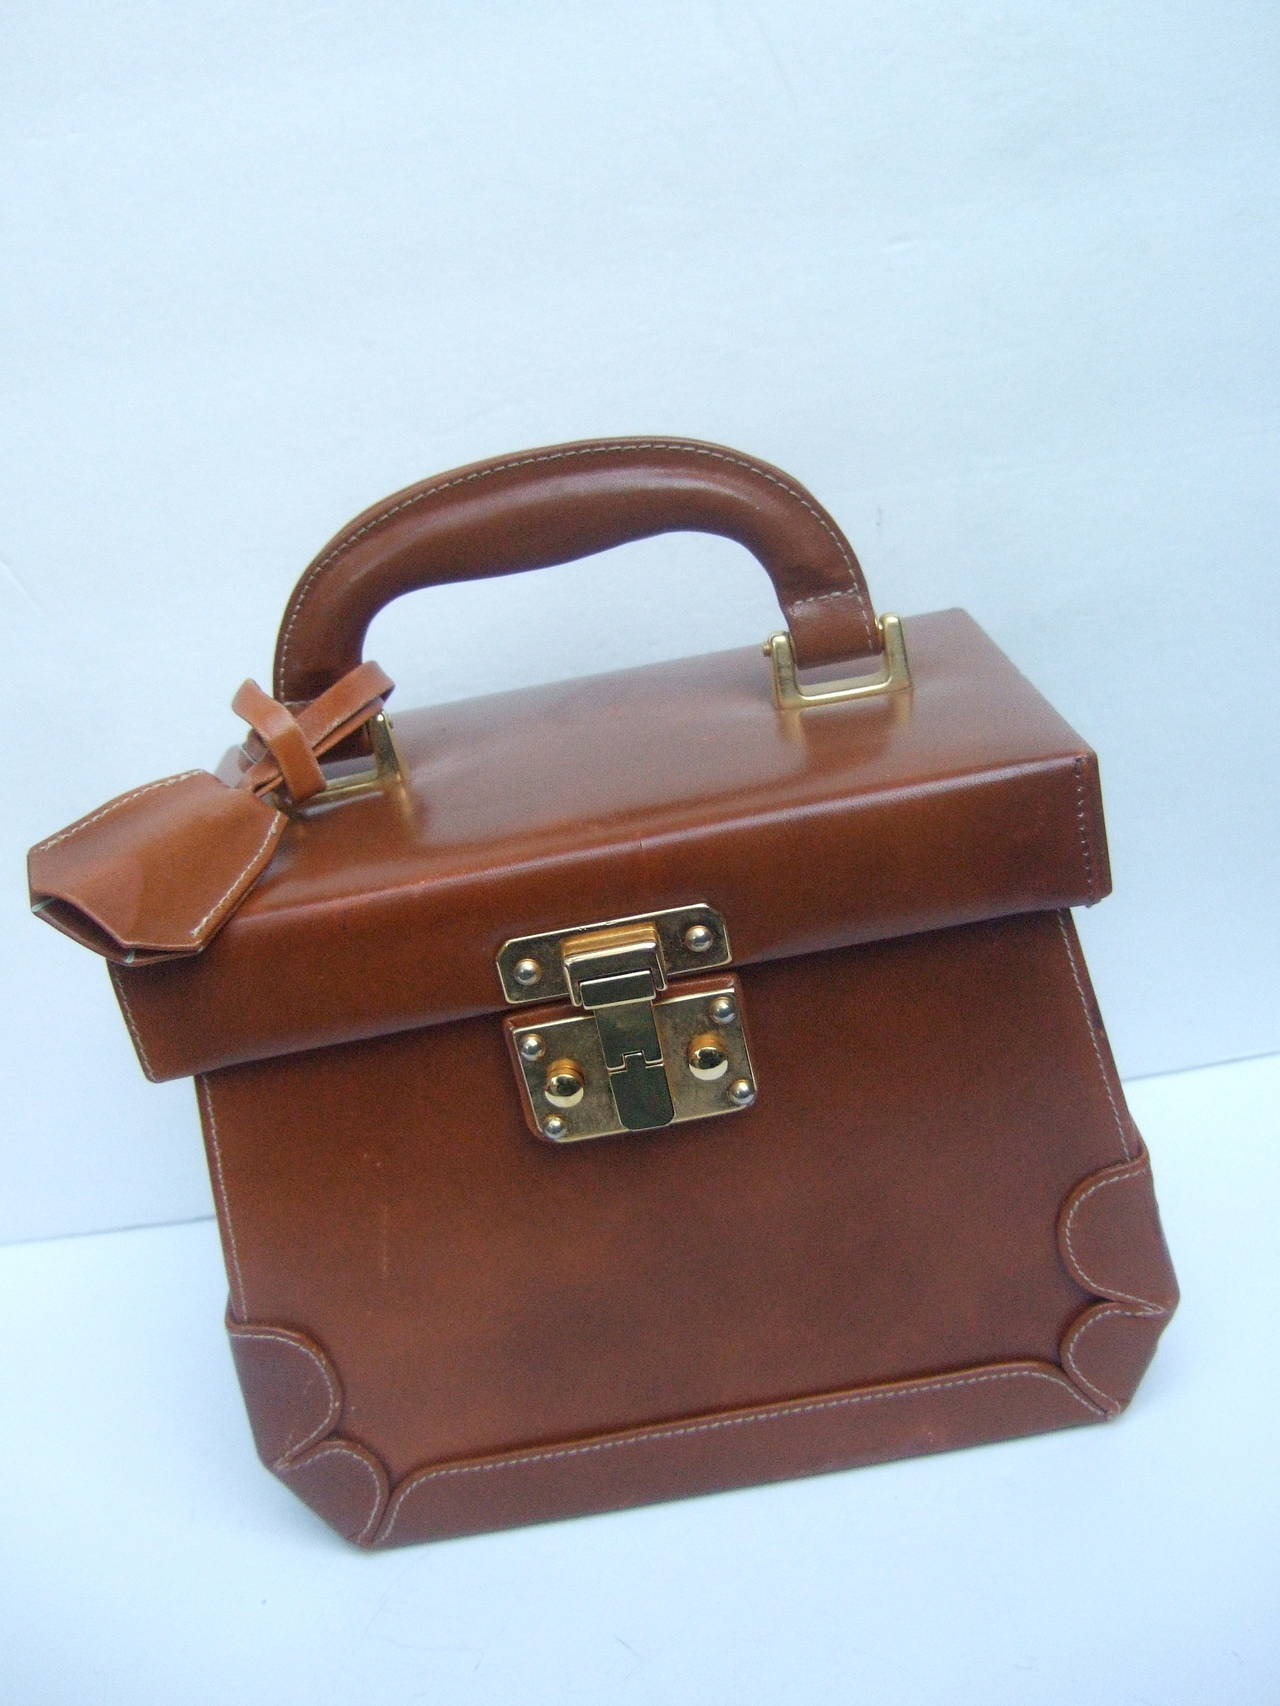 Henri Bendel Caramel brown leather train case handbag Made in Italy
The posh handbag is covered in brown leather with sleek gilt metal hardware
The stylish box style handbag is designed with a gilt metal clasp mechanism 
The lock key for the